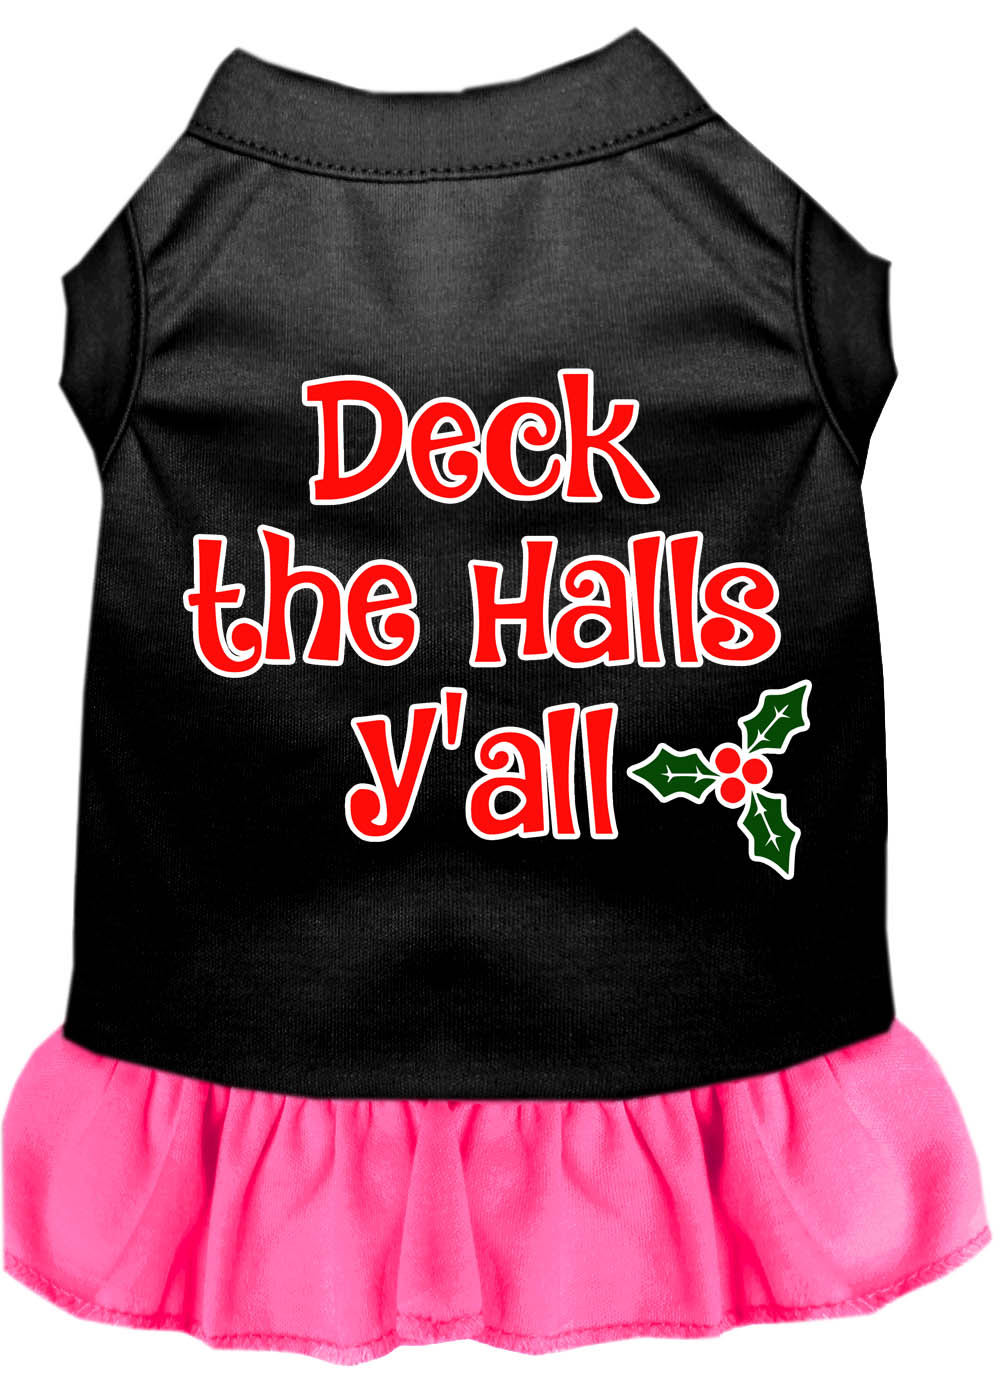 Deck the Halls Y'all Screen Print Dog Dress Black with Bright Pink Lg